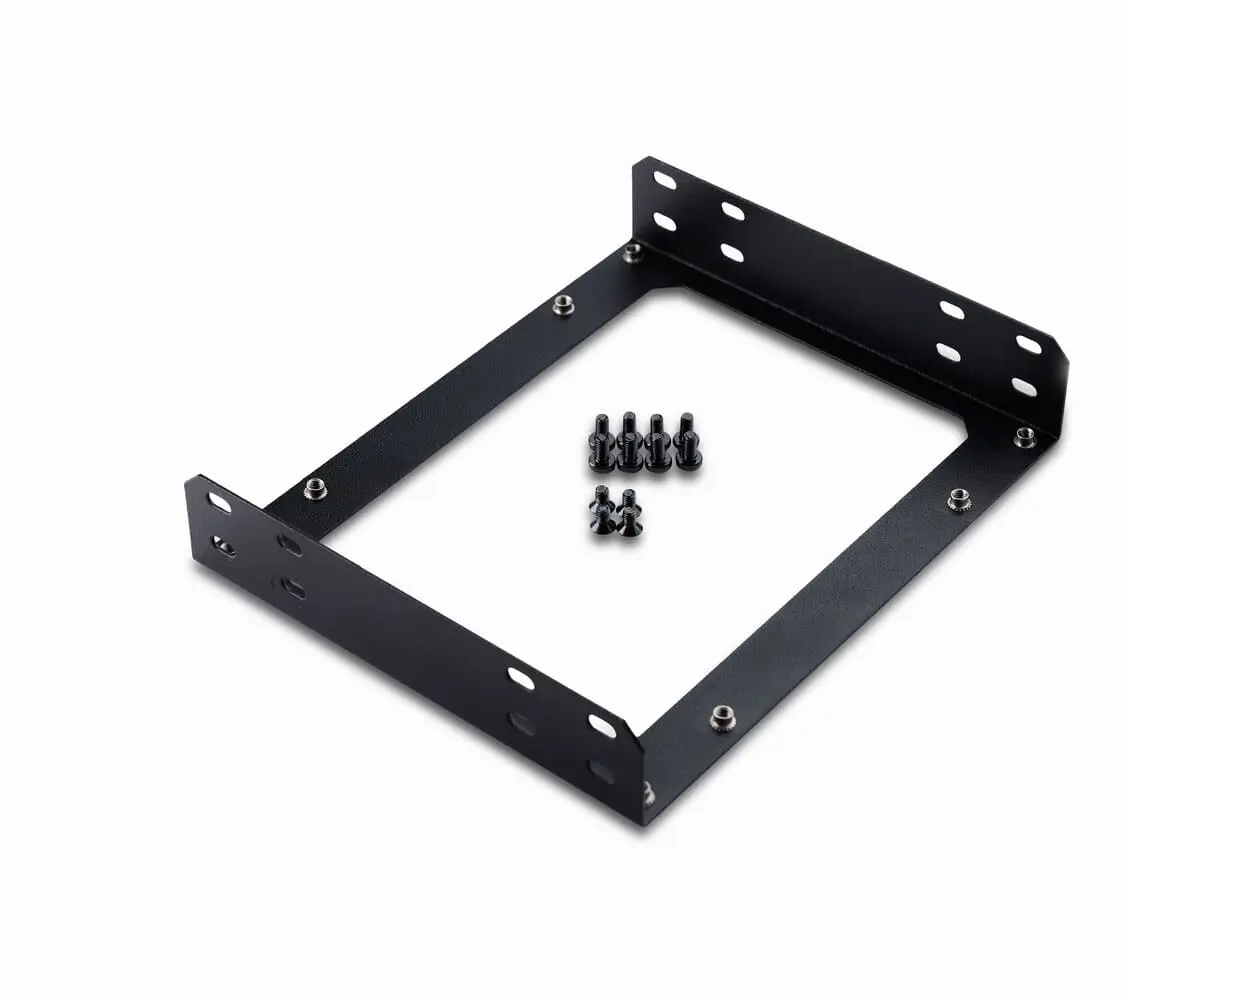 SSD Mounting Bracket for Quad 2.5 SSD in Cerberus or Cerberus X 